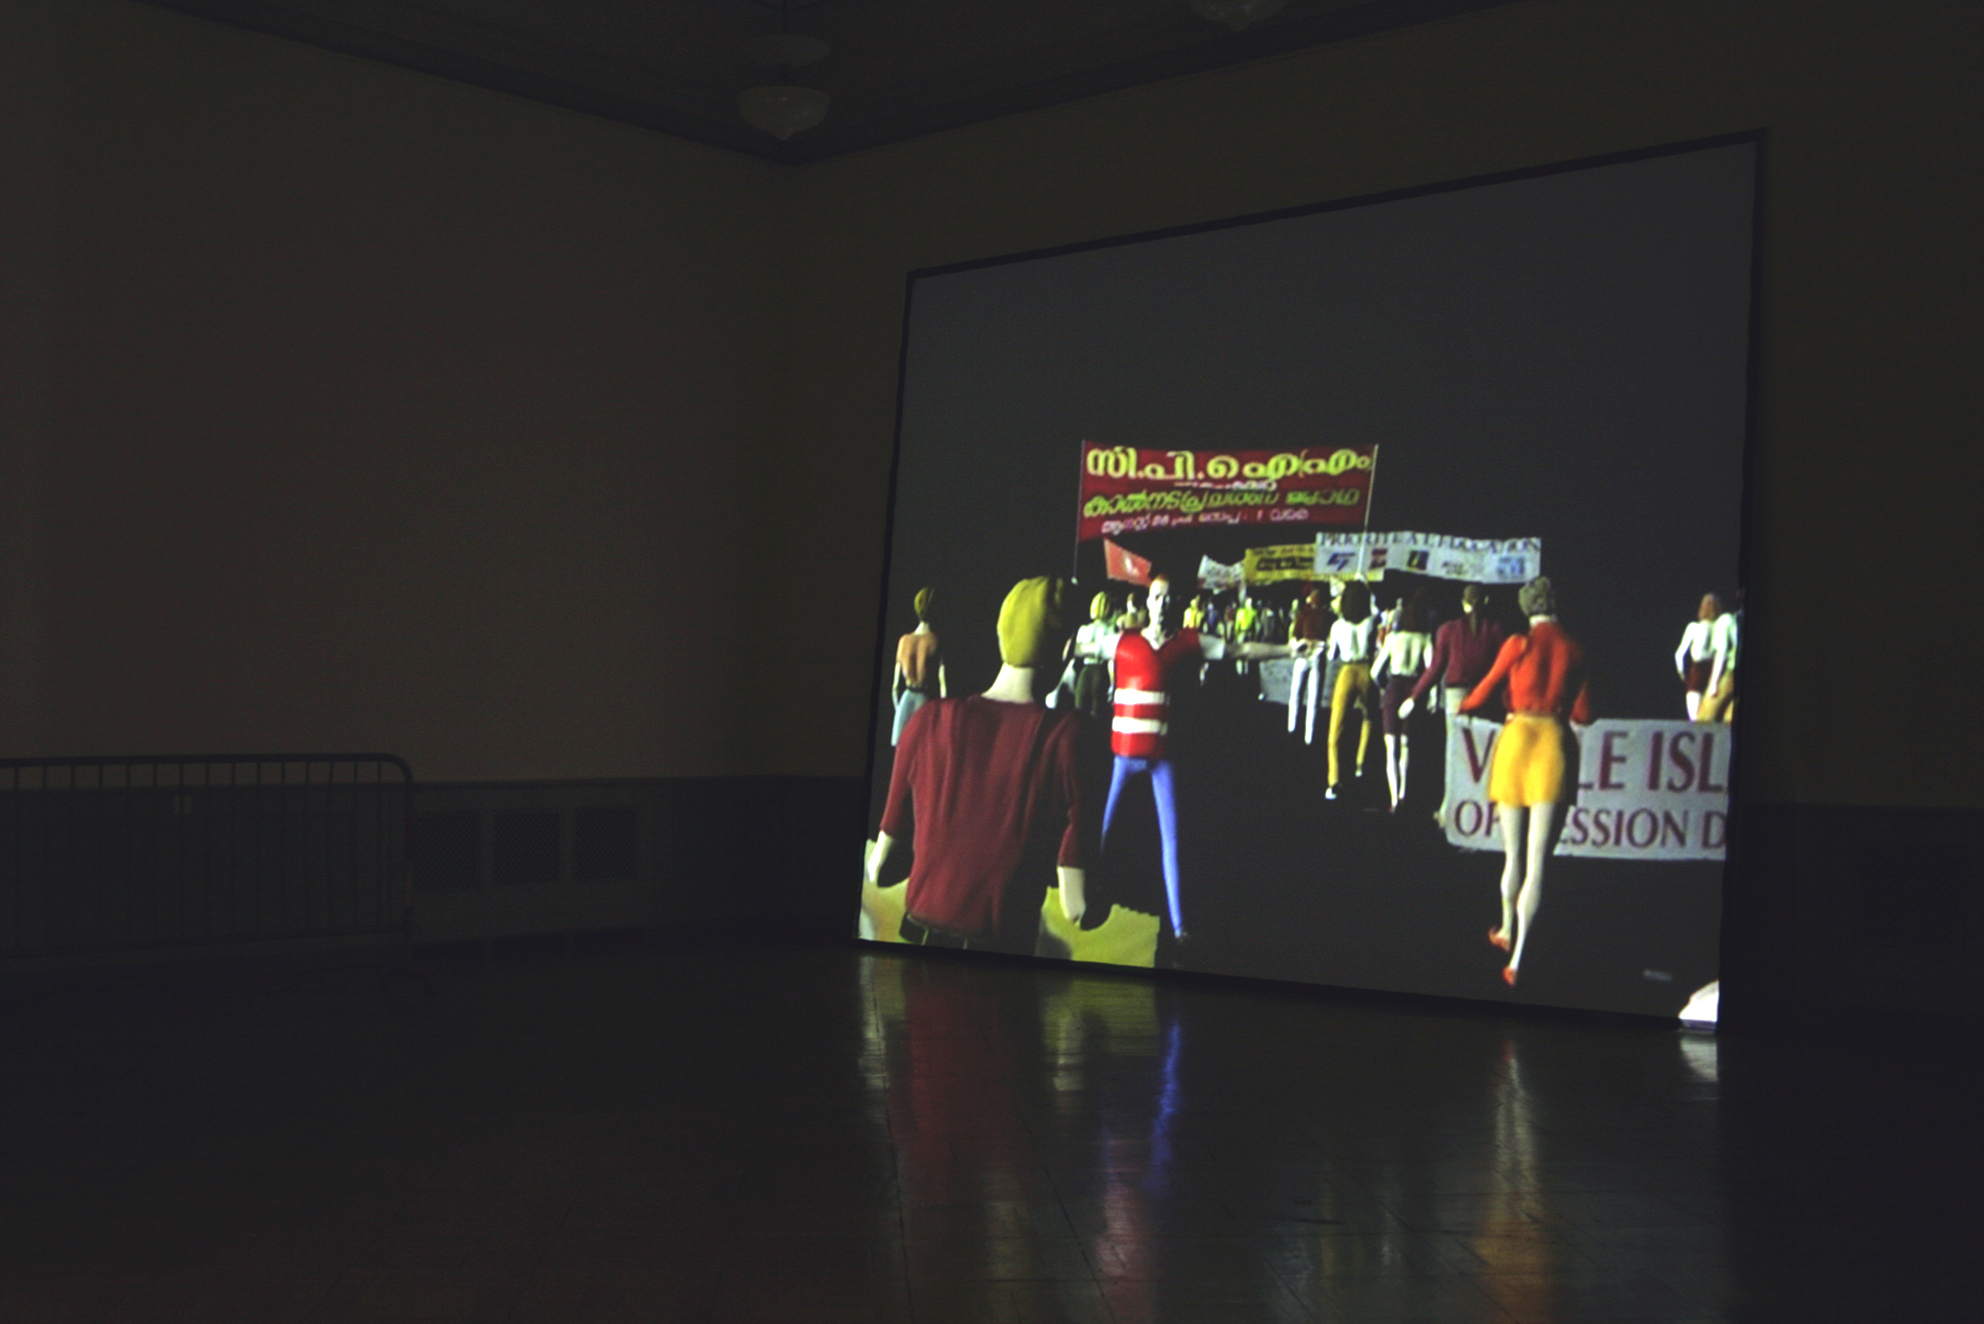 On Stage, video SD, 4/3, 576i, 4’53”, loop, 2007, in collaboration with Swann Thommen